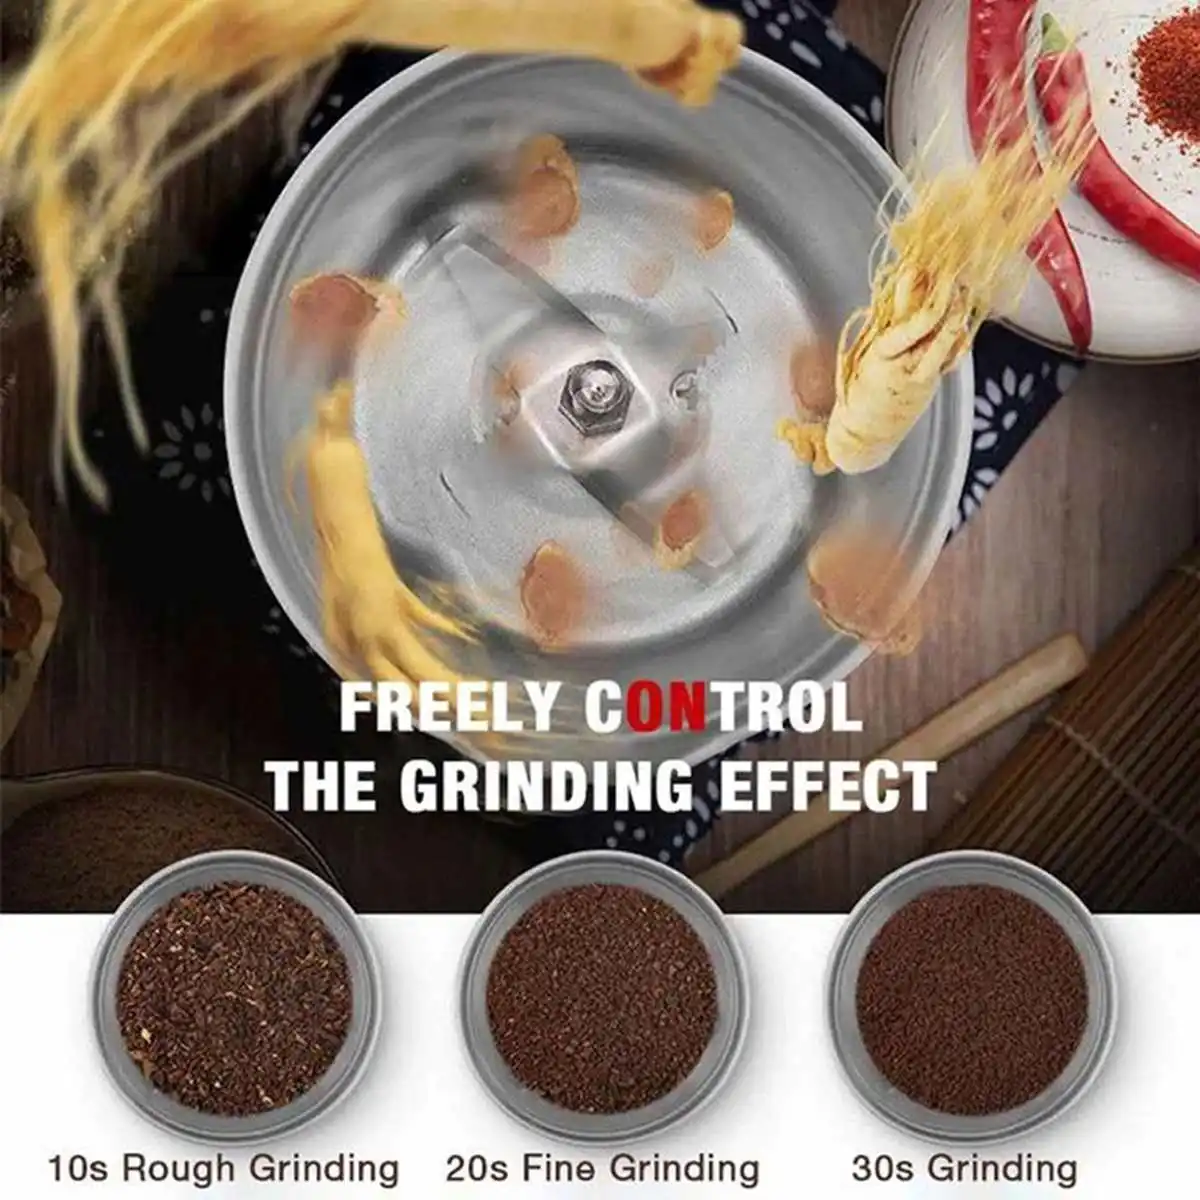 Electric Coffee Grinder Electric Kitchen Cereals Nuts Beans Spices Grains Grinder Machine Multifunctional Home Coffee Grinder